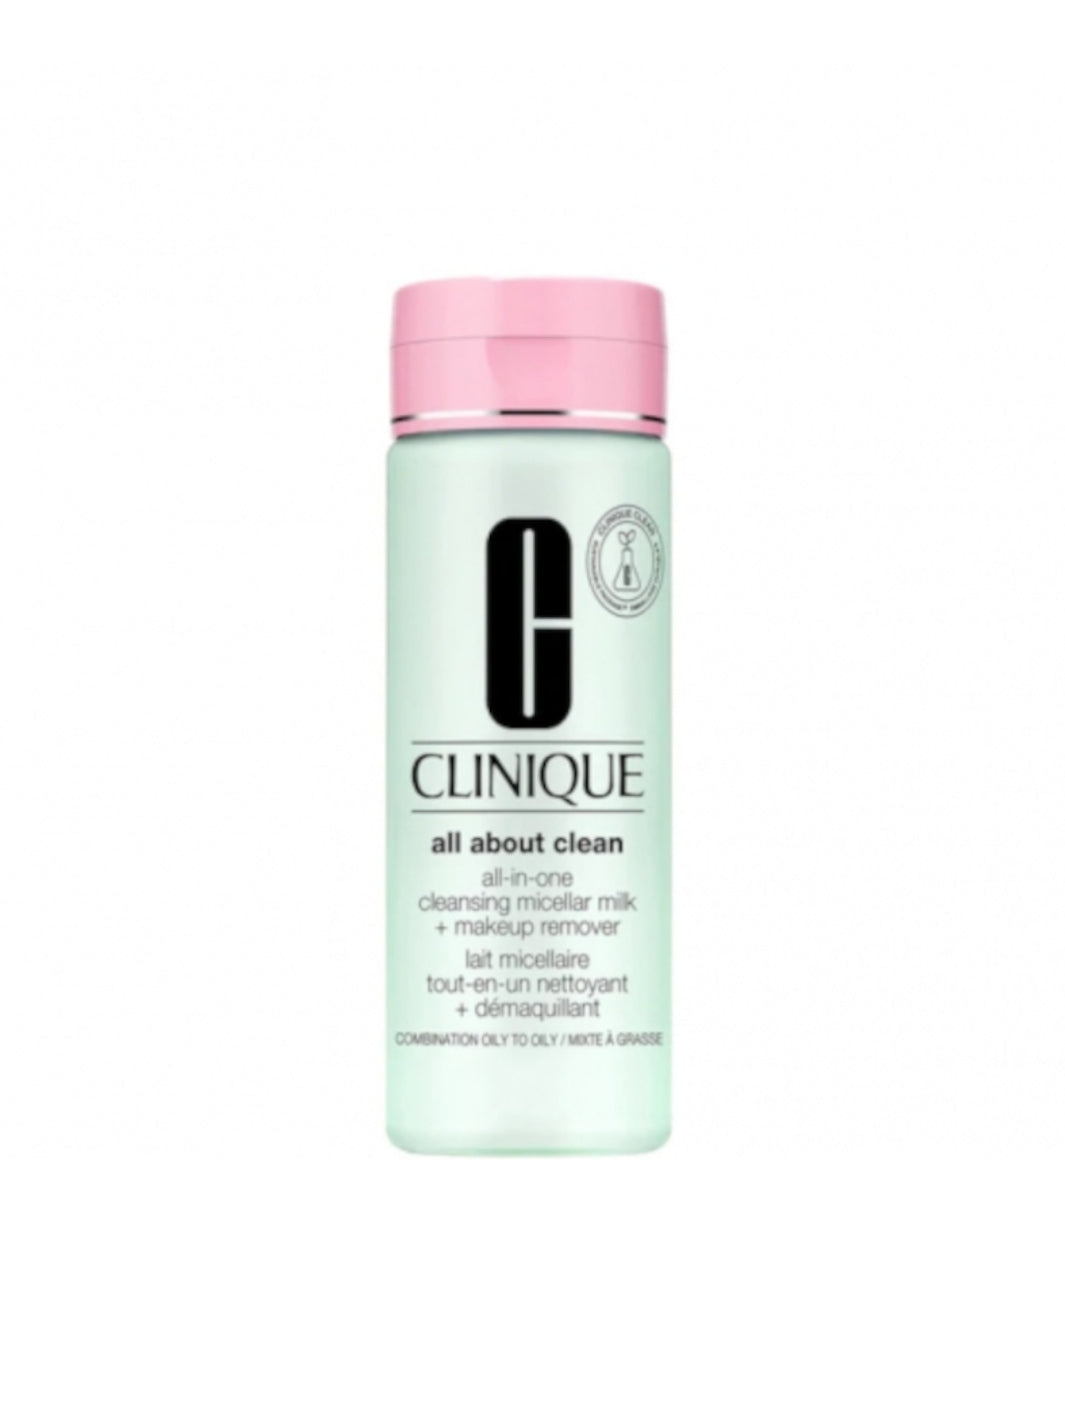 Clinique all in one cleansing micellar milk - pelle Tipo III IV